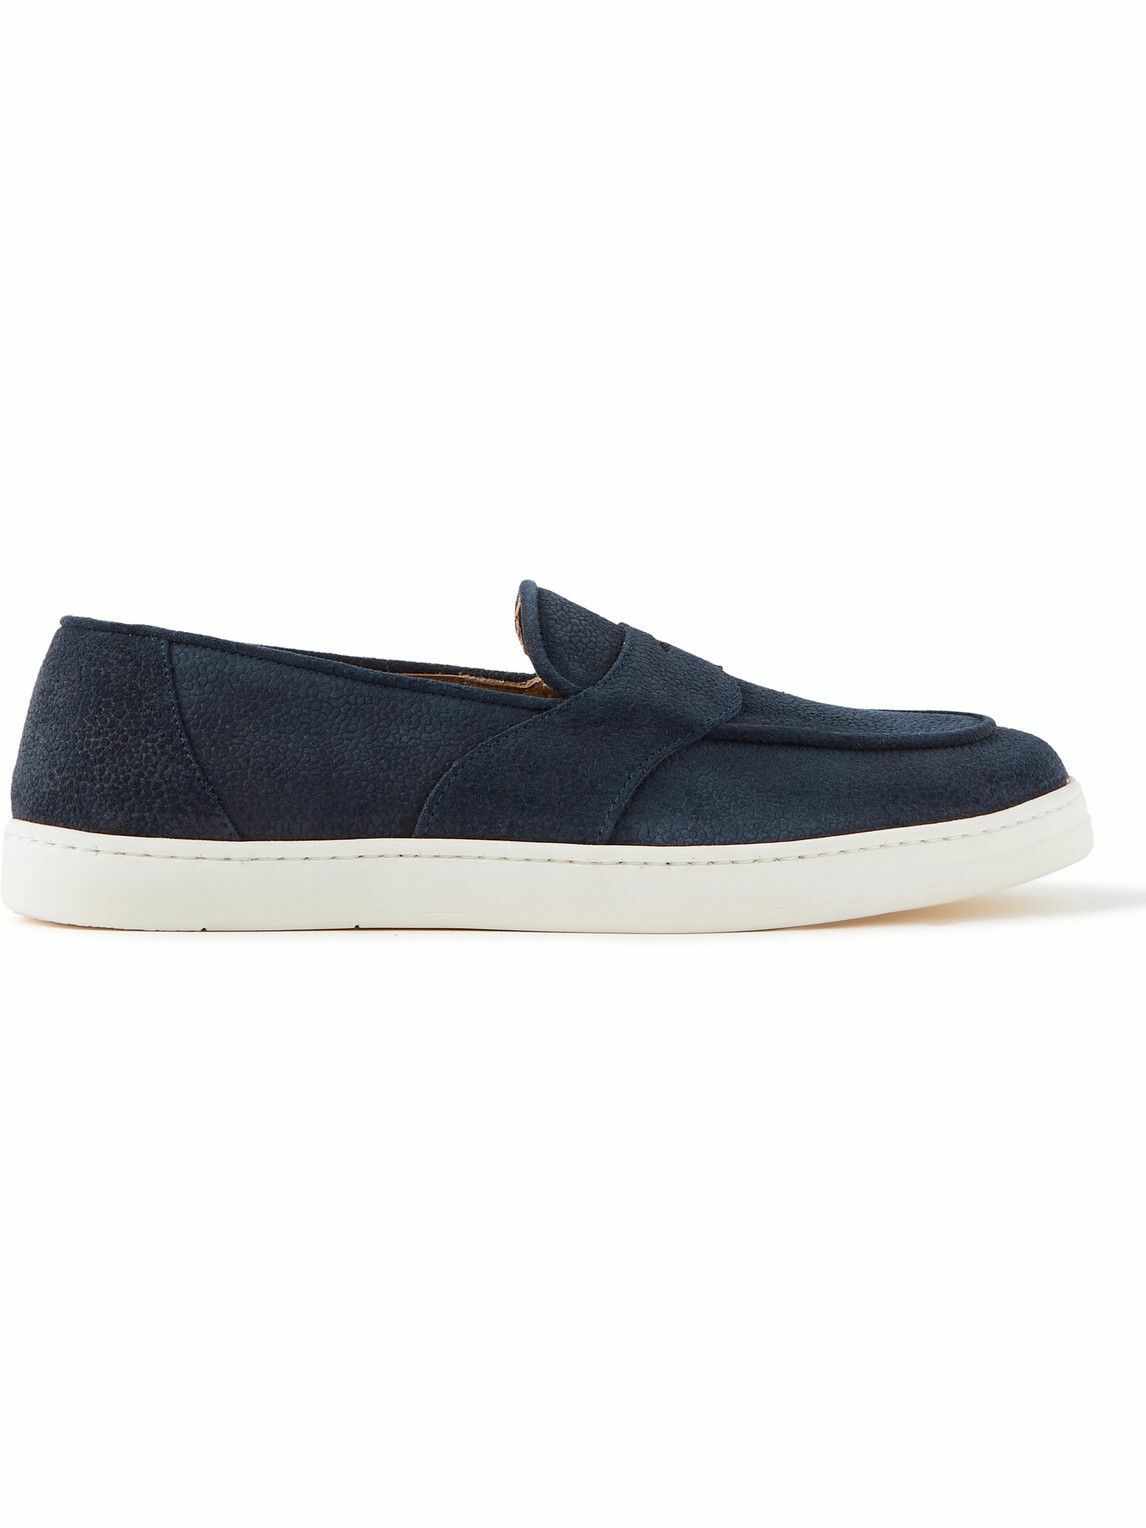 George Cleverley - Joey Full-Grain Suede Penny Loafers - Blue George ...